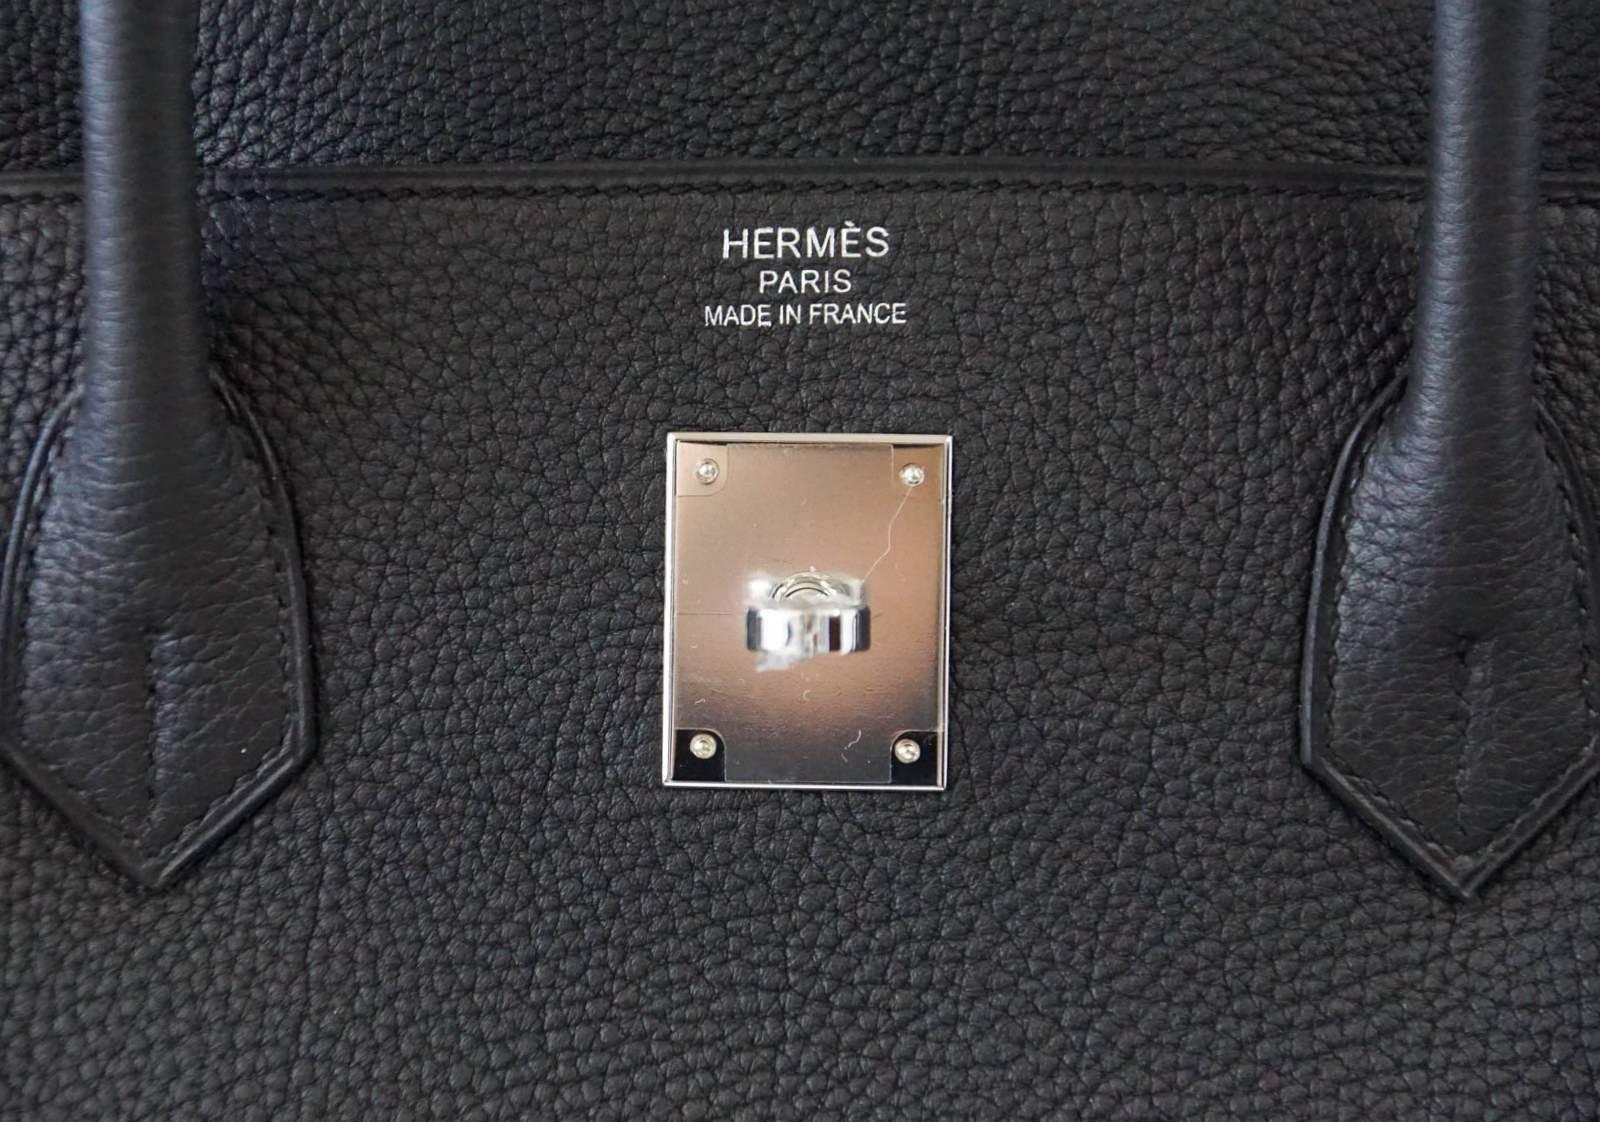 Guaranteed authentic classic rich Matte Black HERMES Birkin.
Togo leather.  
Comes with lock, keys, clochette, sleeper, raincoat and signature HERMES box. 
NEW or NEVER WORN.
final sale


BAG MEASURES:
LENGTH  40cm / 15.75"
TALL    29cm / 